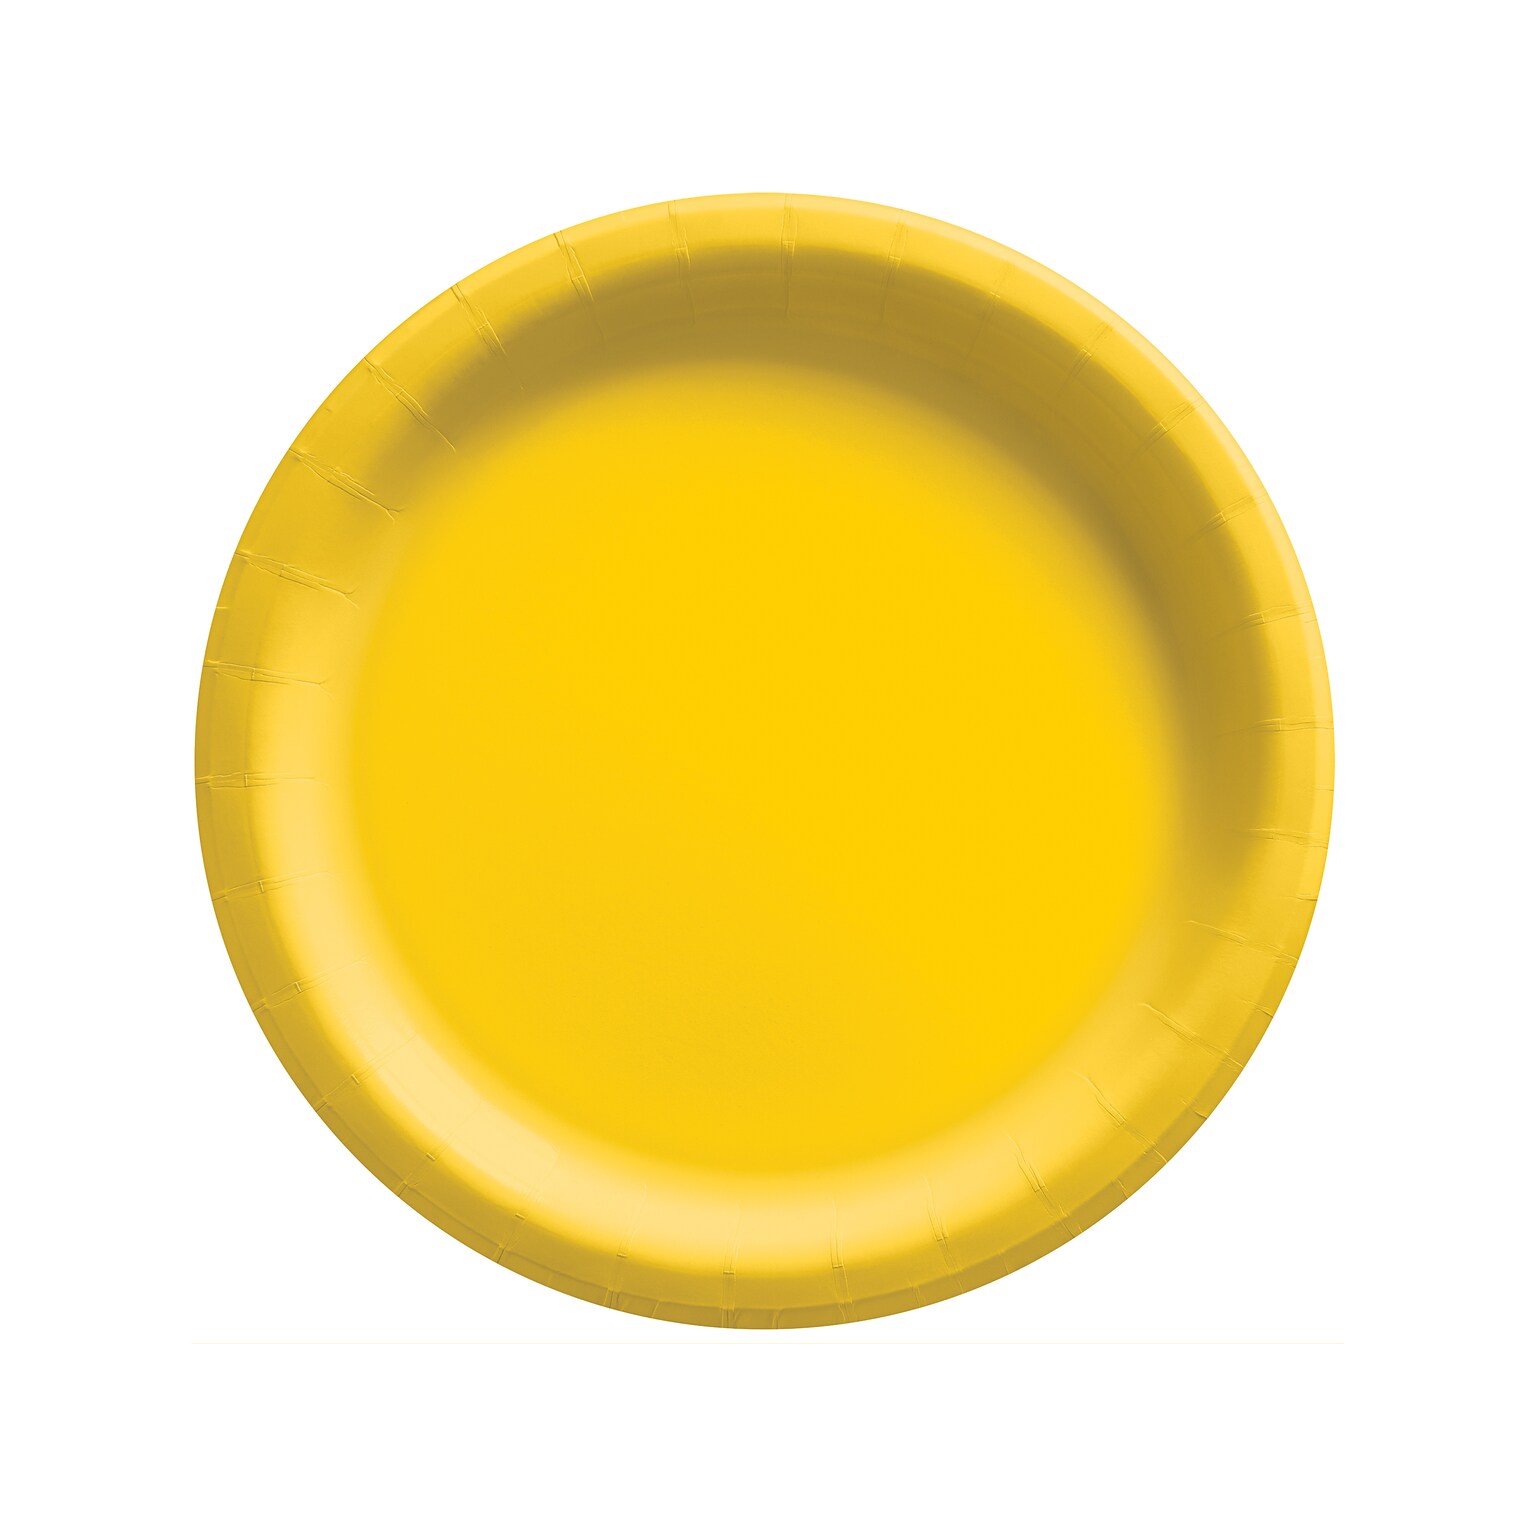 Amscan 8.5 Paper Plate, Yellow, 50 Plates/Pack, 3 Packs/Set (650011.09)